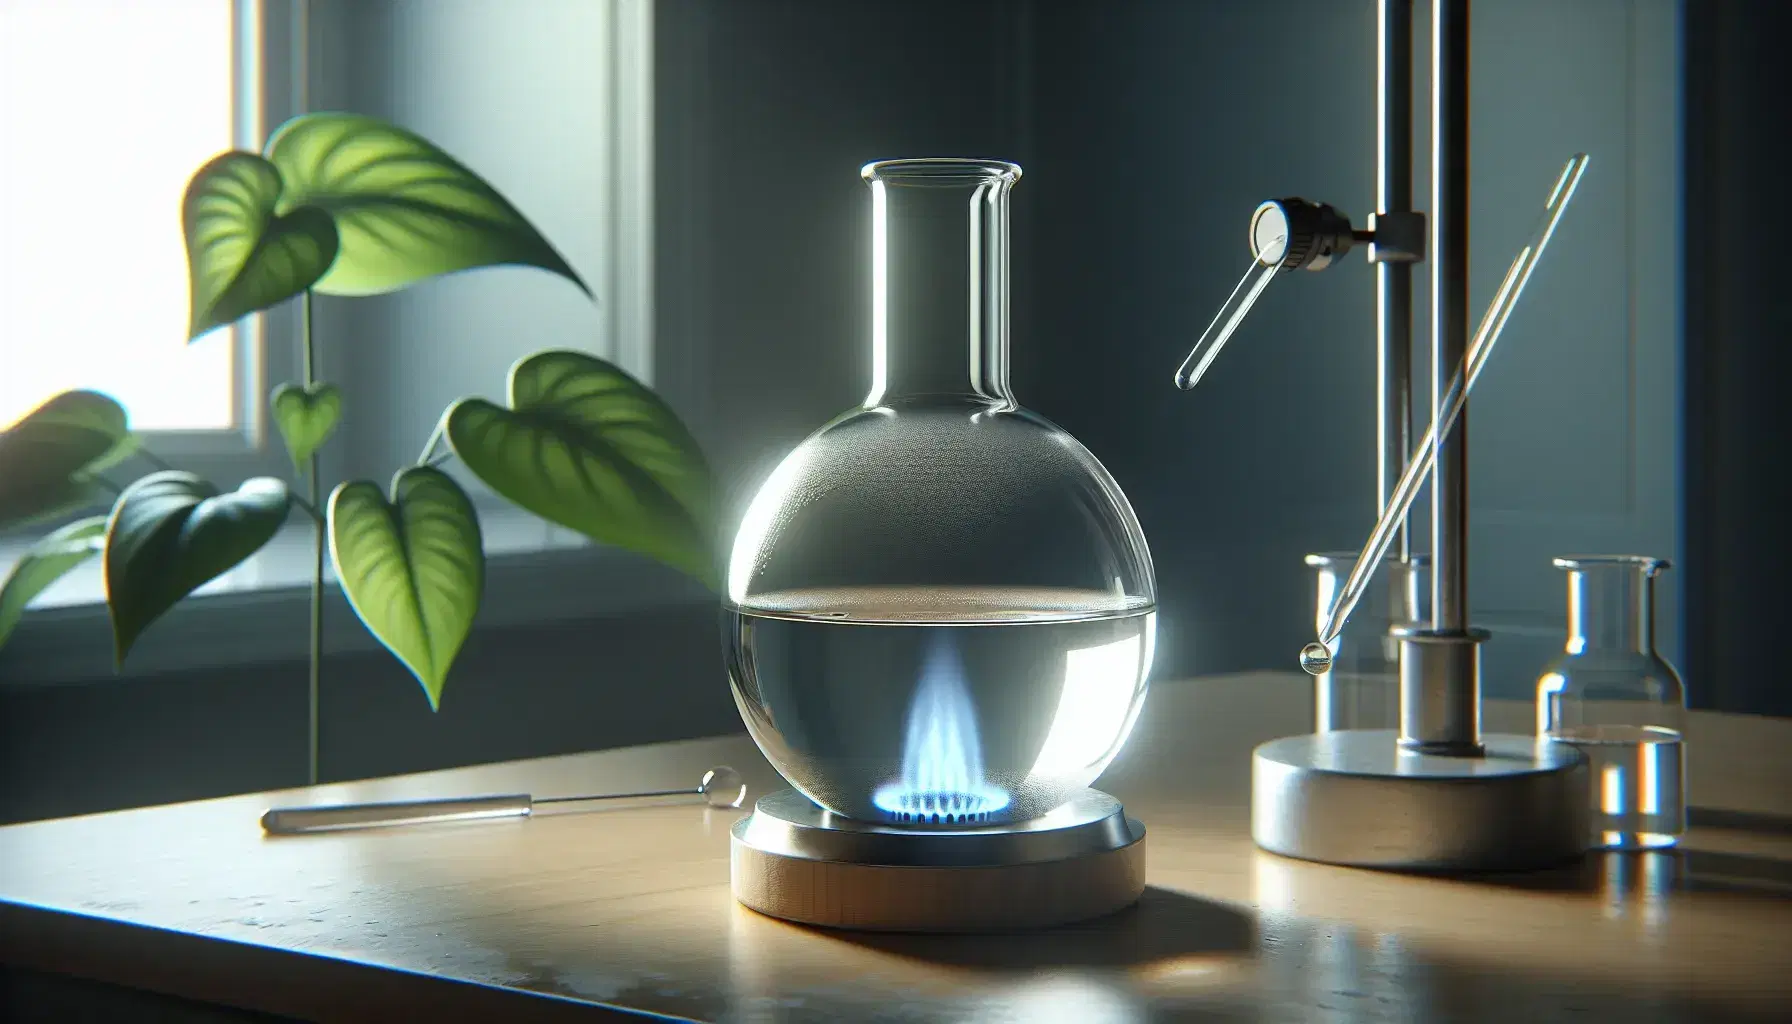 Glass flask with transparent liquid heated by blue flame of a Bunsen burner on wooden laboratory bench, glass rod and blurred green plant in background.